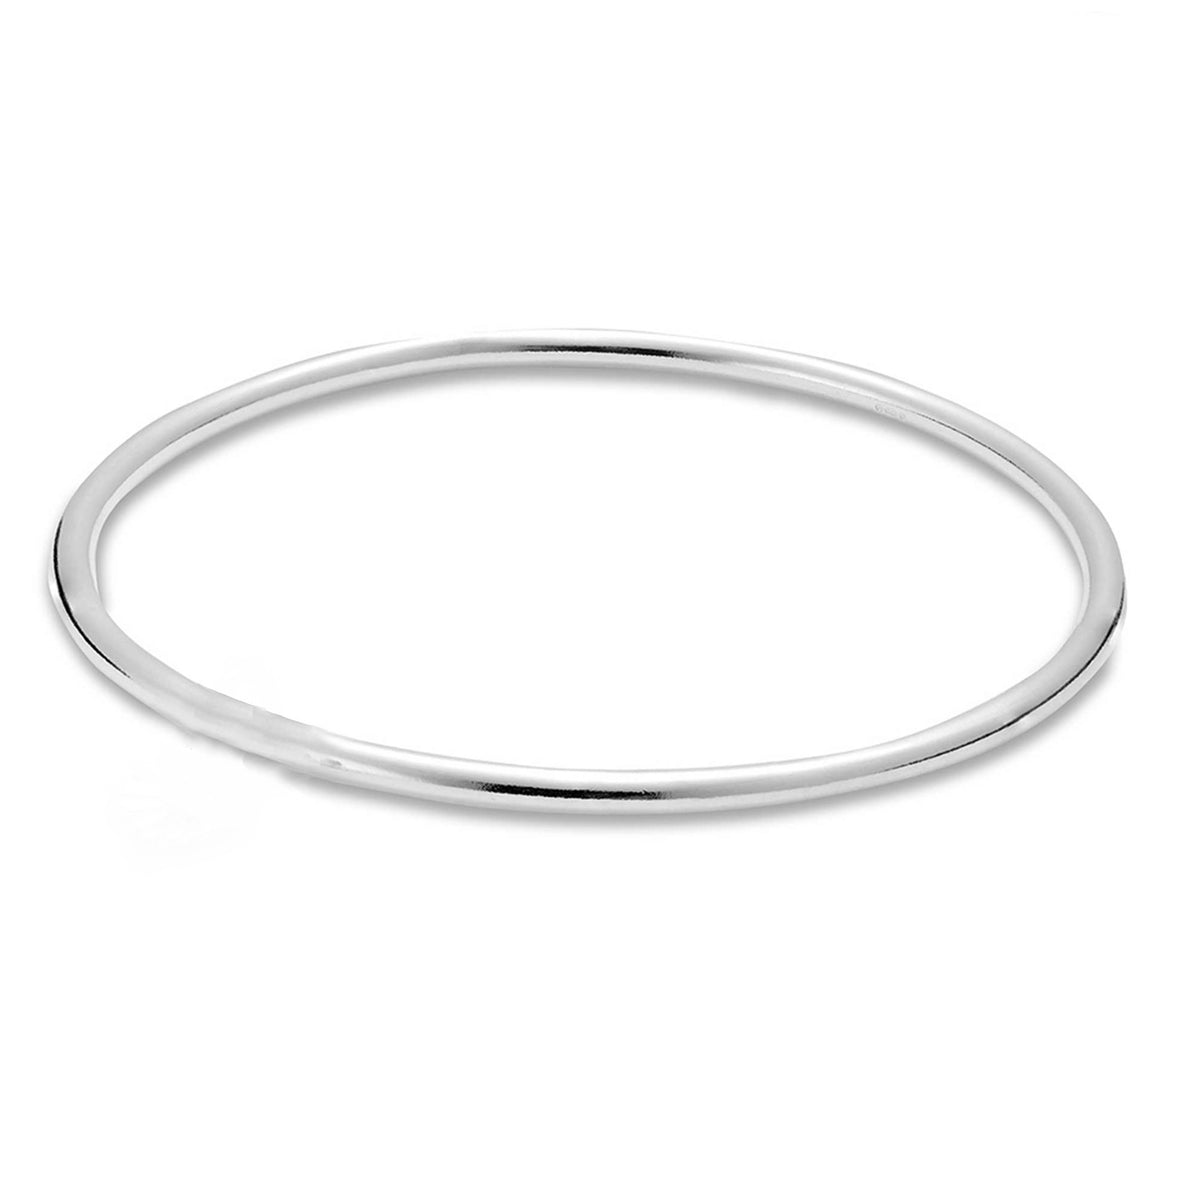 Recycled Solid Silver Bangle - 3mm Round Wire